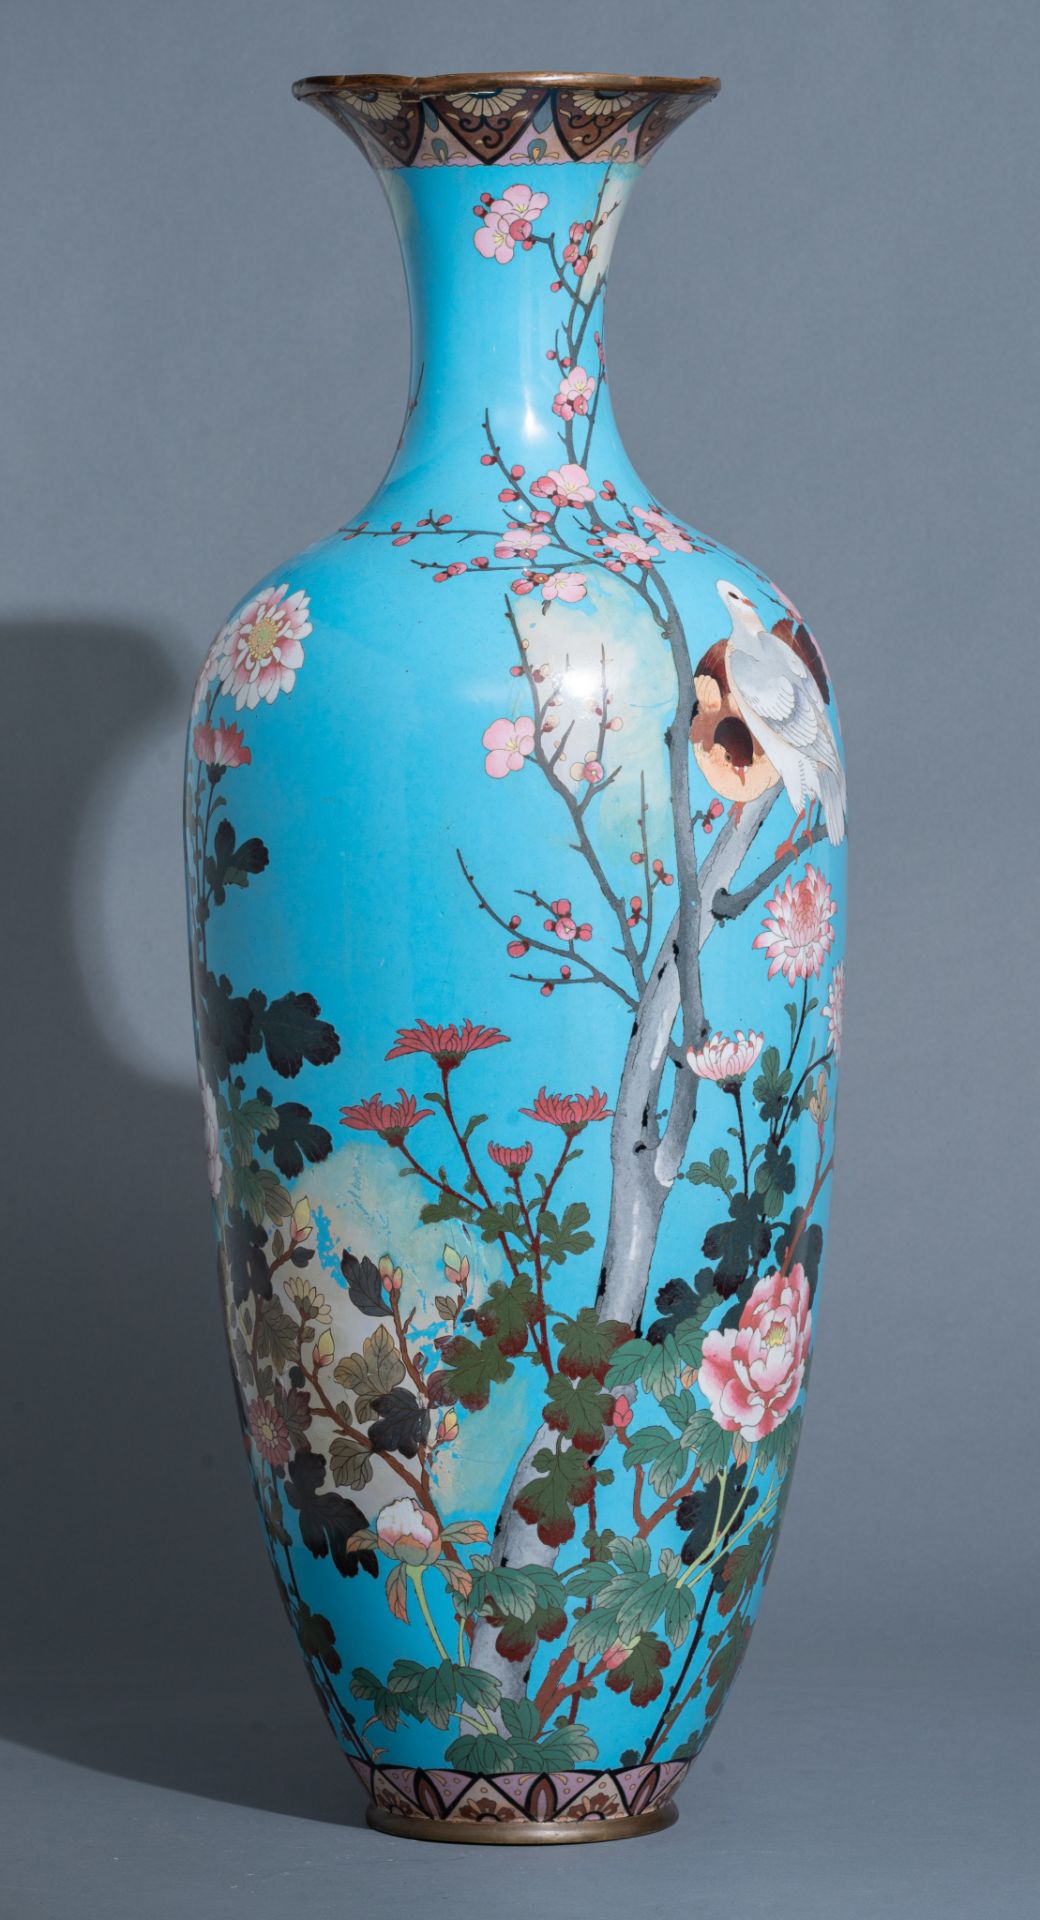 A Japanese cloisonné enamelled bronze vase, late 19thC/early 20thC, H 92,5 cm - Image 4 of 11